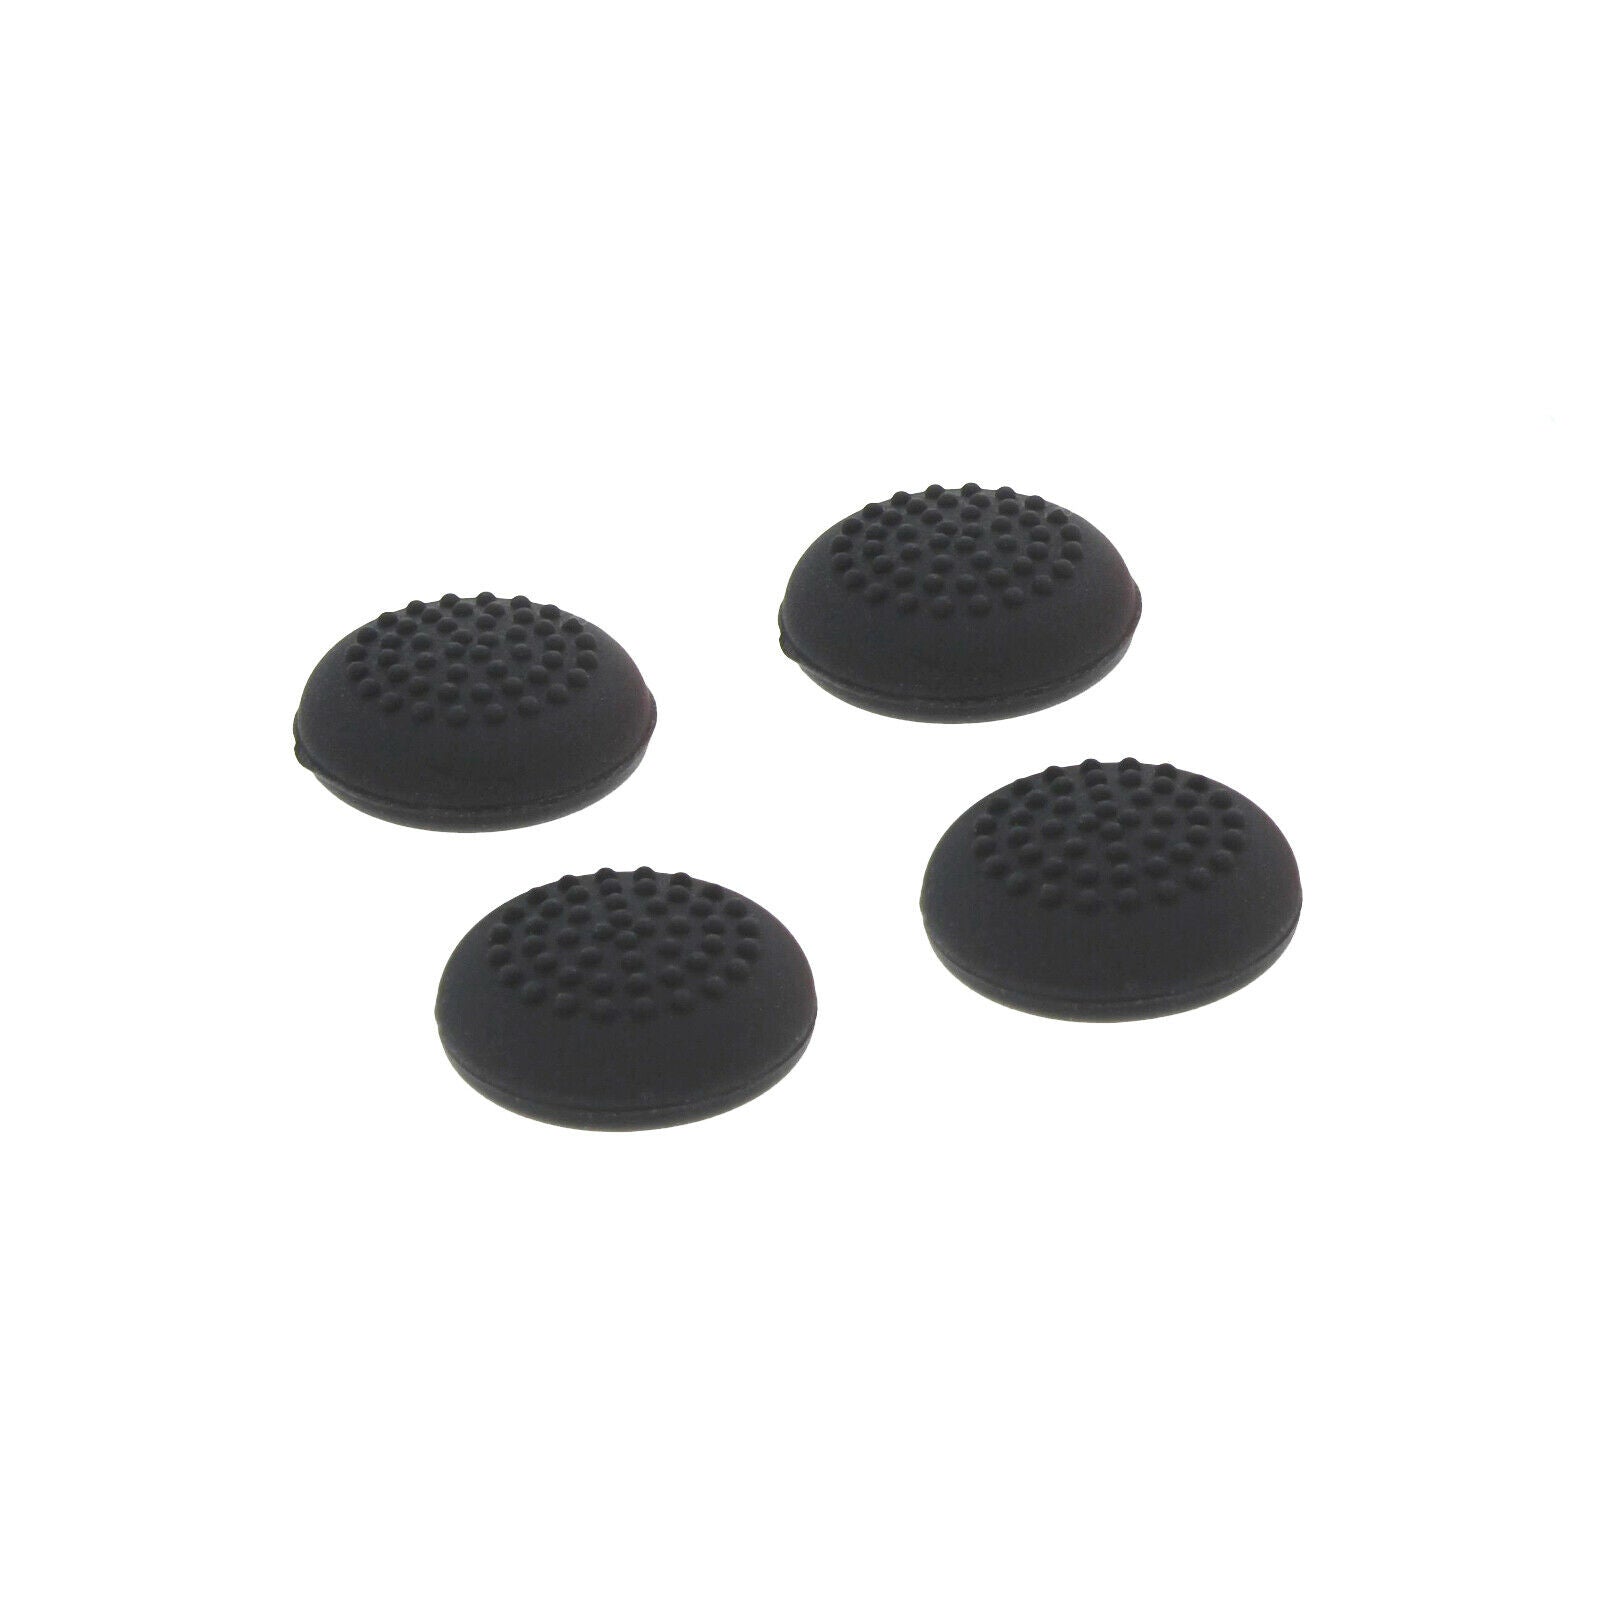 Gameware Thumb Grips For Nintendo Switch